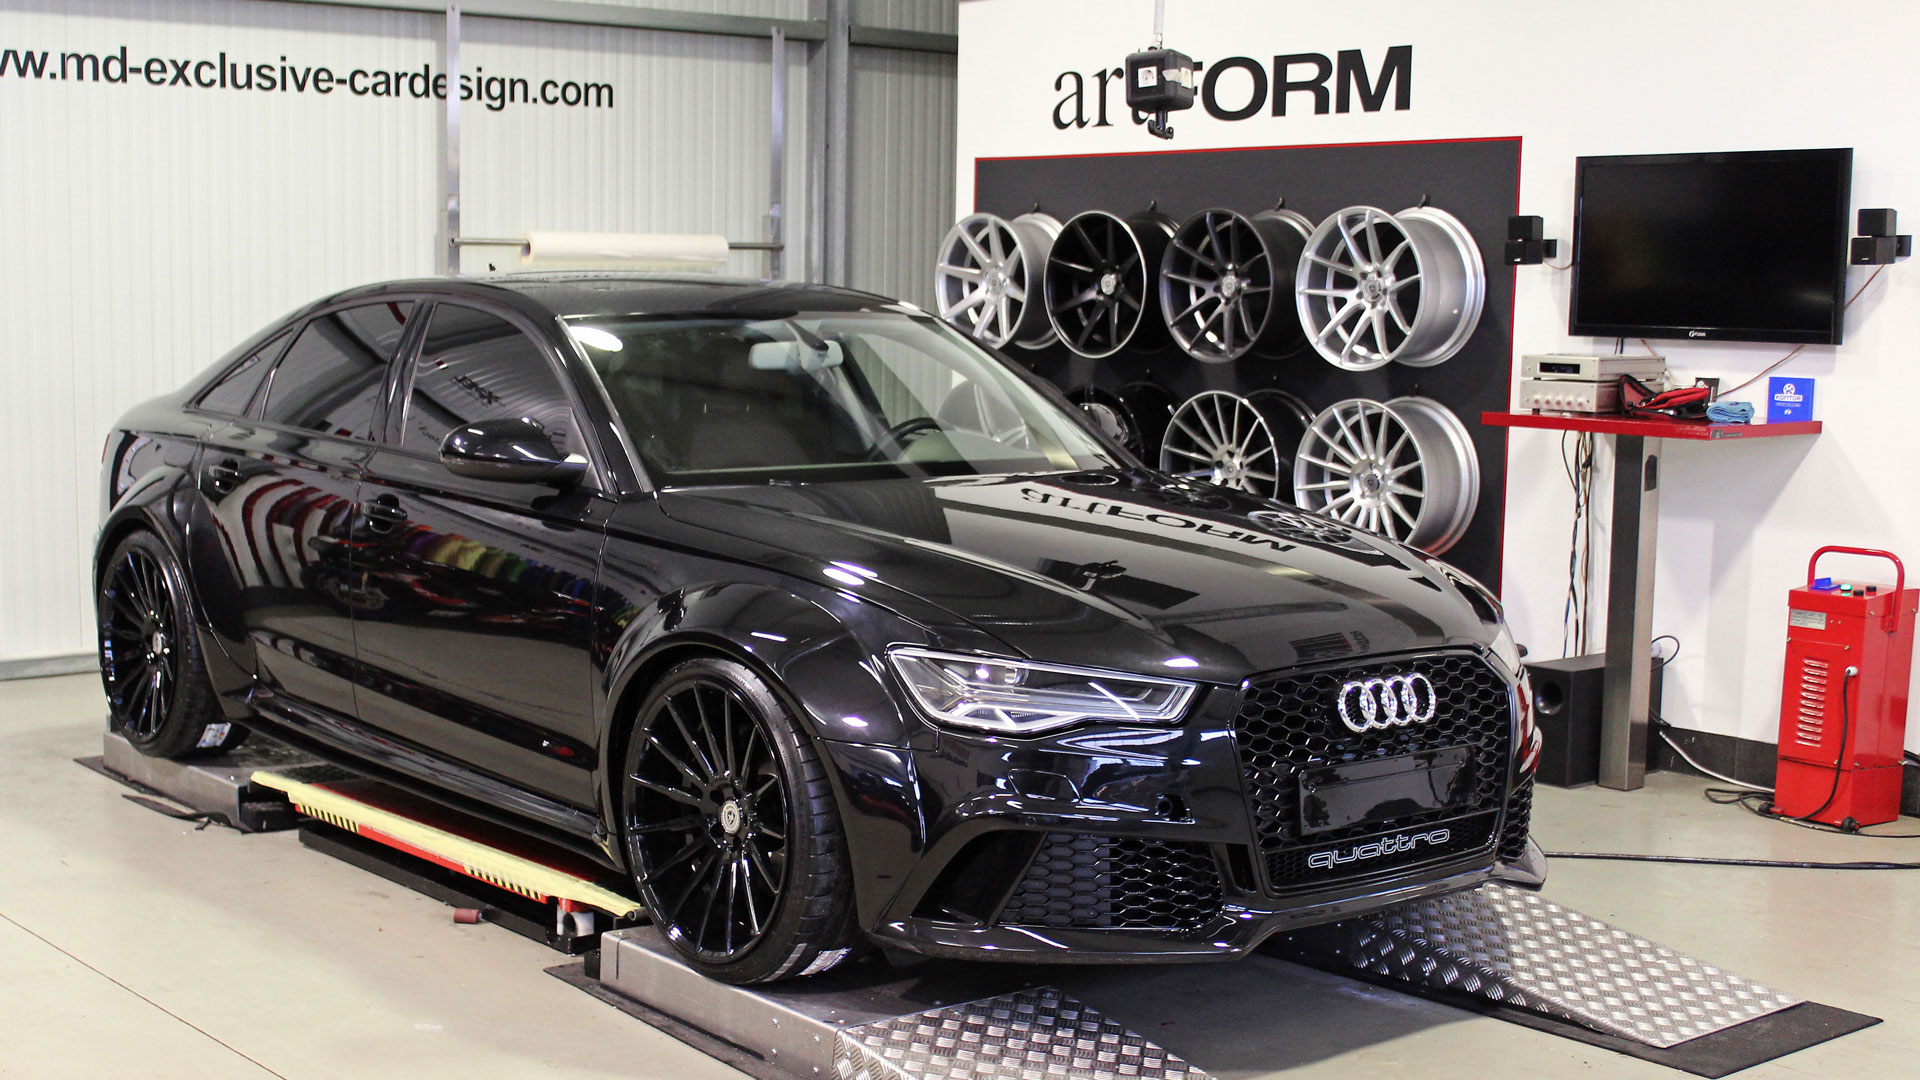 Audi A6/RS6 C7 Limousine Tuning | PD600R Widebody Aerodynamic Kit | M&D  Exclusive Cardesign